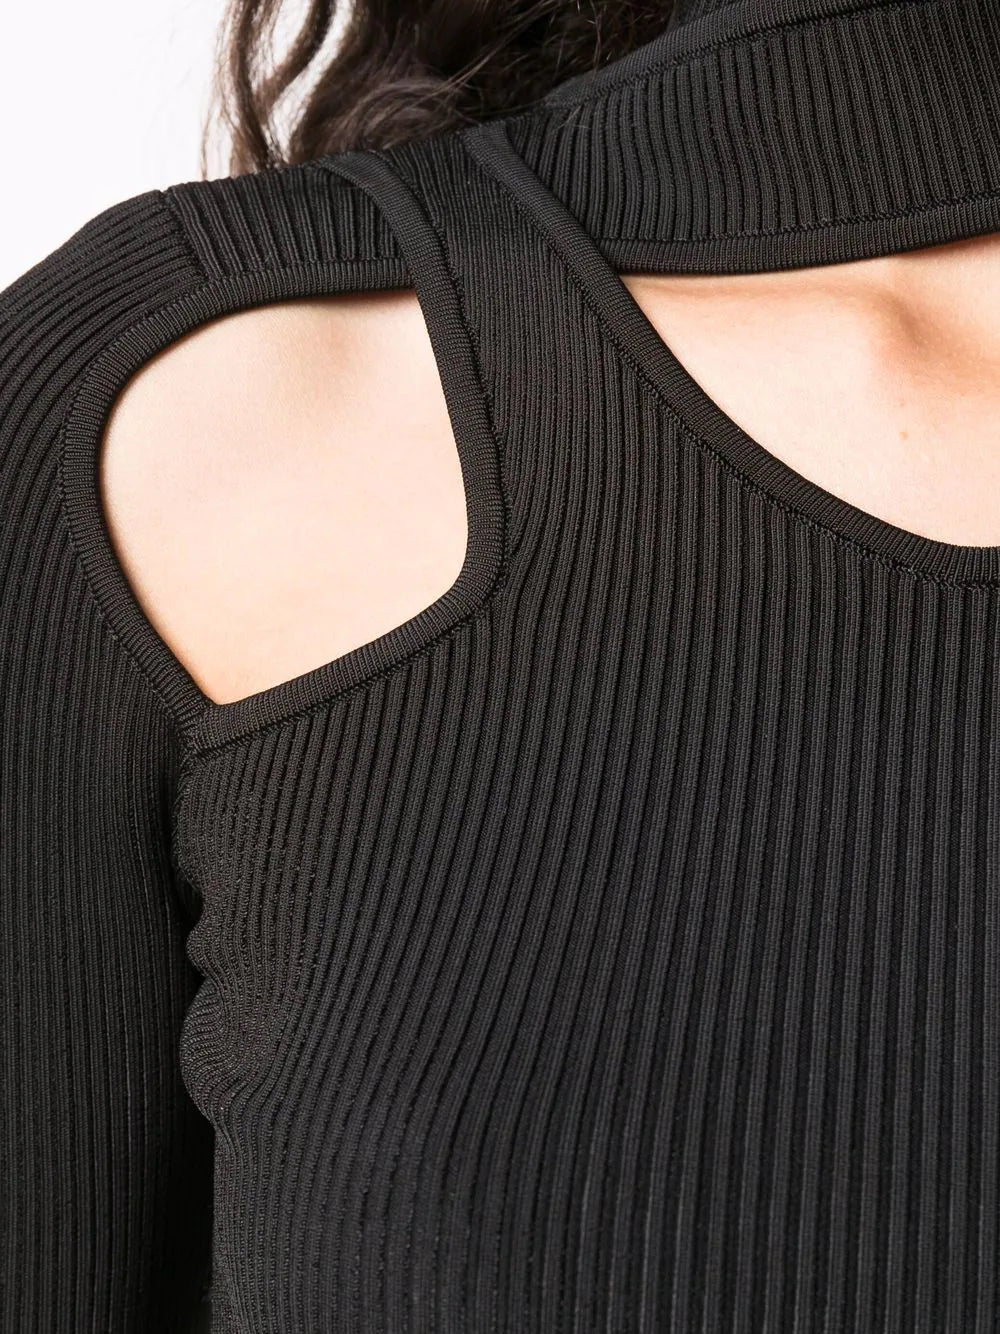 CUTOUT-DETAIL KNITTED TOP